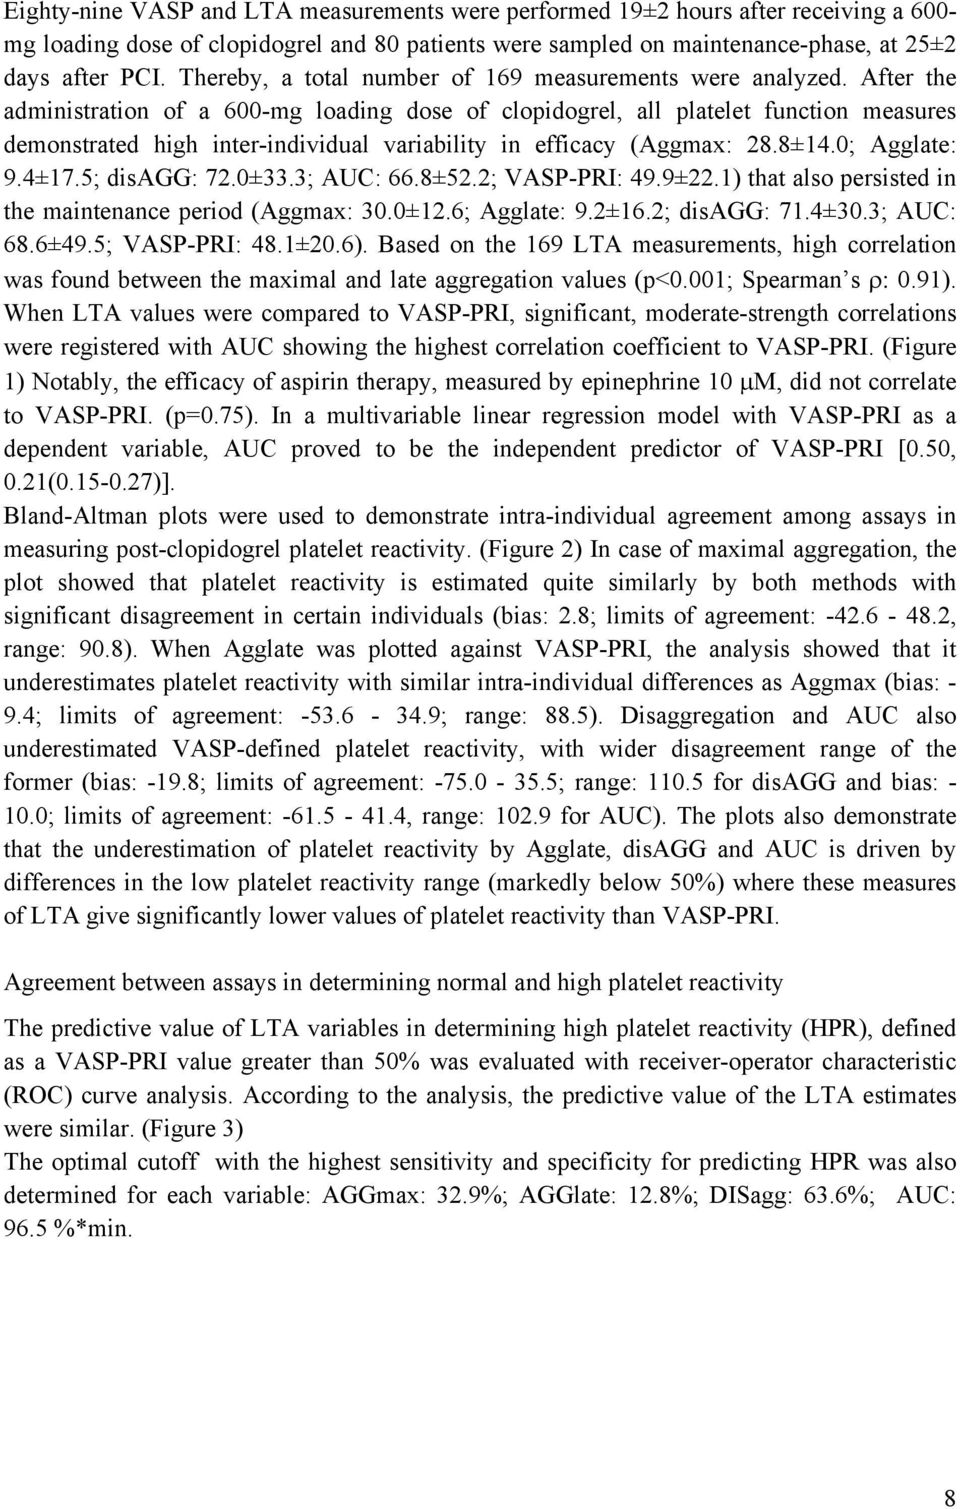 After the administration of a 600-mg loading dose of clopidogrel, all platelet function measures demonstrated high inter-individual variability in efficacy (Aggmax: 28.8±14.0; Agglate: 9.4±17.